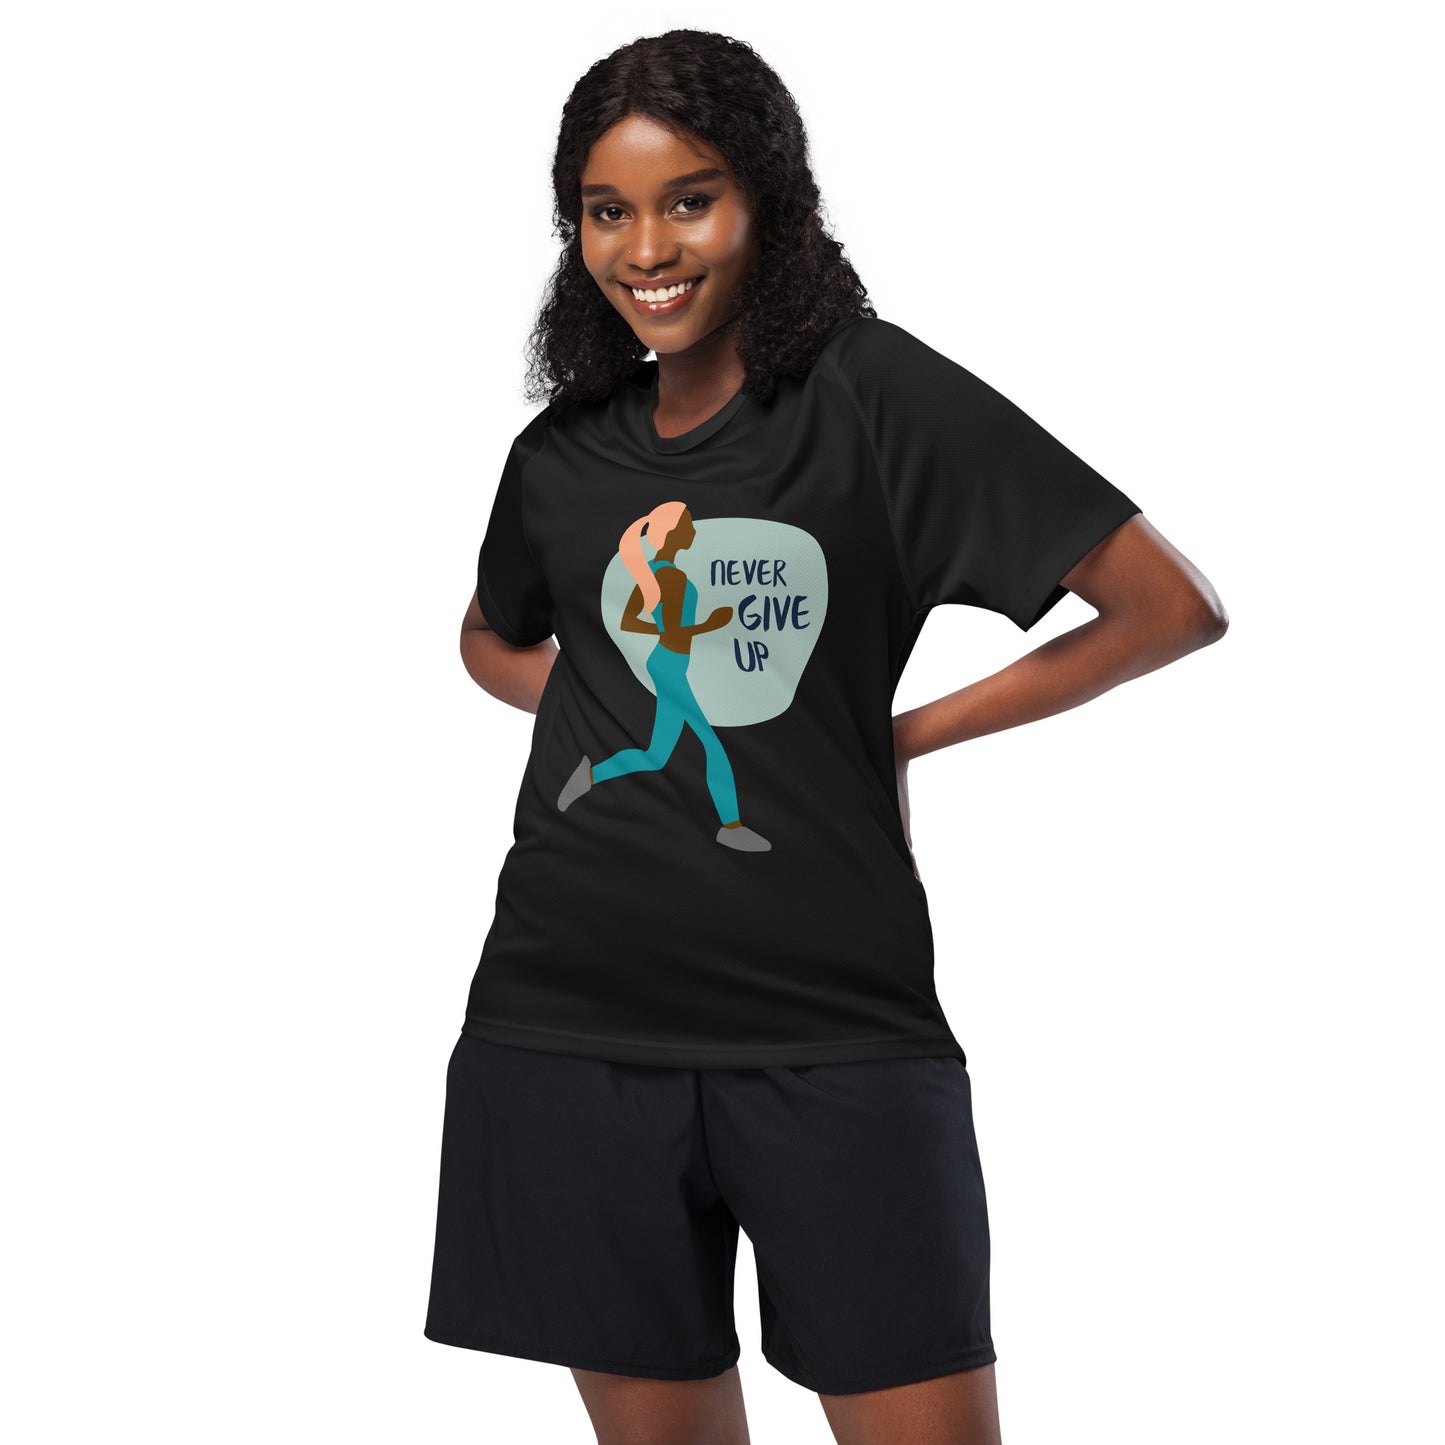 The Gymbum UK QuickDry Women's Never Give Up Performance Tee